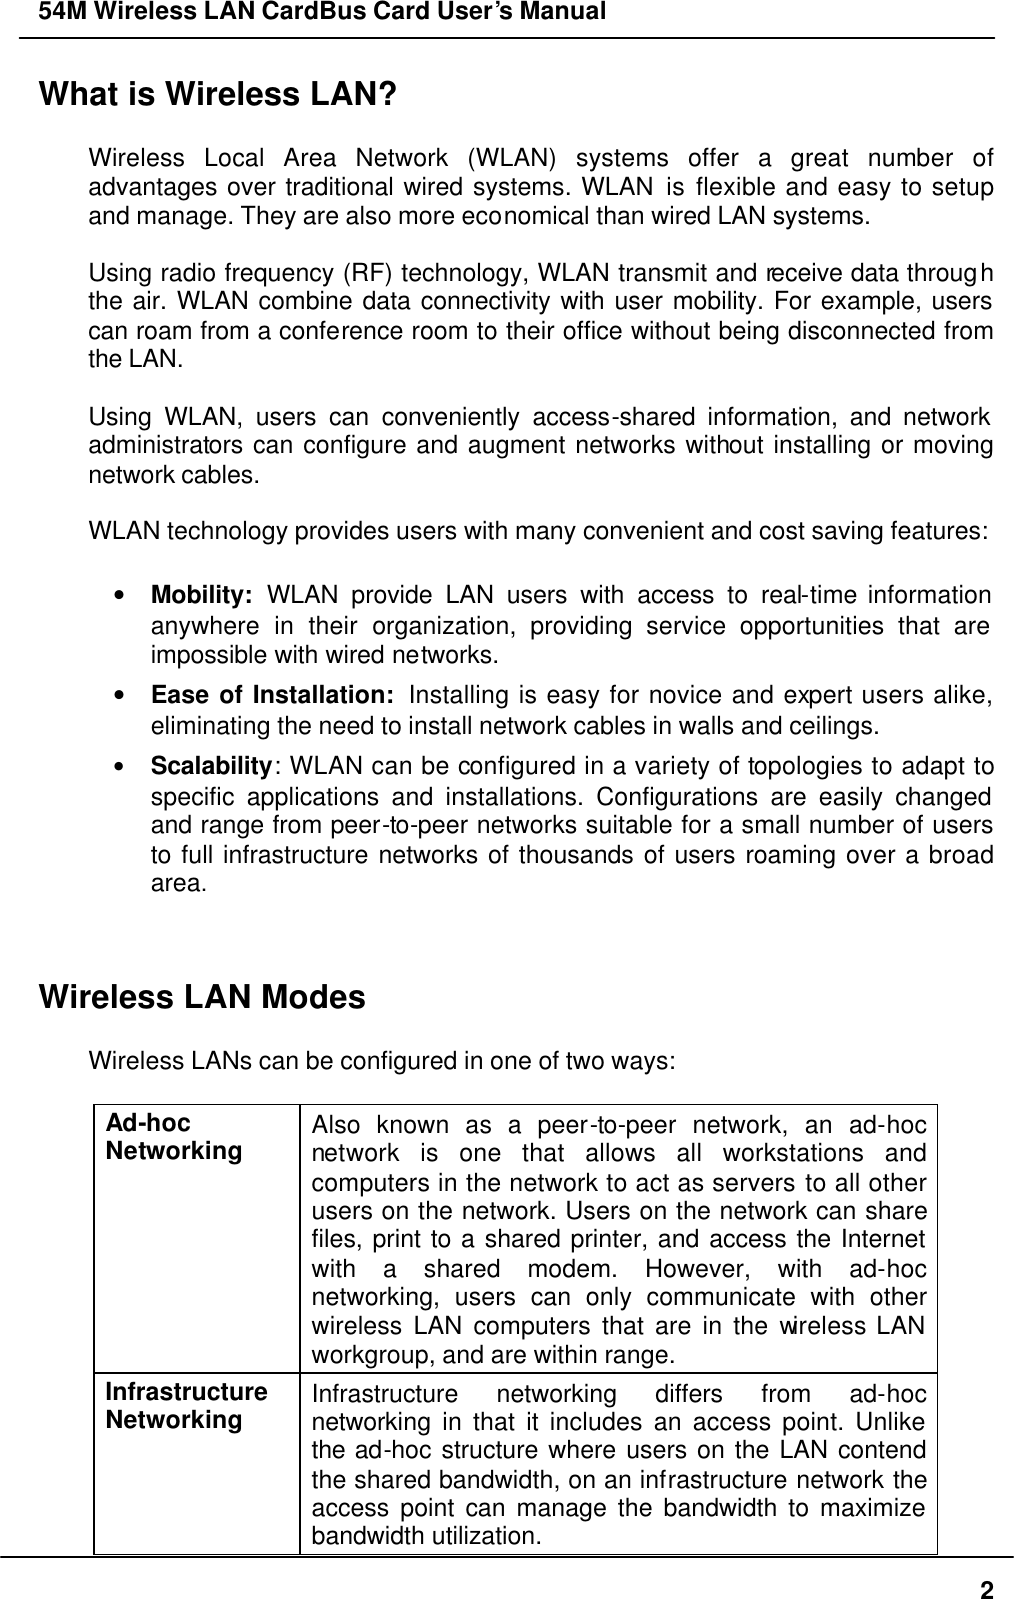 54M Wireless LAN CardBus Card User’s Manual  2 What is Wireless LAN?  Wireless Local Area Network (WLAN) systems offer a great number of advantages over traditional wired systems. WLAN is flexible and easy to setup and manage. They are also more economical than wired LAN systems.  Using radio frequency (RF) technology, WLAN transmit and receive data through the air. WLAN combine data connectivity with user mobility. For example, users can roam from a conference room to their office without being disconnected from the LAN.  Using WLAN, users can conveniently access-shared information, and network administrators can configure and augment networks without installing or moving network cables.  WLAN technology provides users with many convenient and cost saving features:  • Mobility: WLAN provide LAN users with access to real-time information anywhere in their organization, providing service opportunities that are impossible with wired networks. • Ease of Installation:  Installing is easy for novice and expert users alike, eliminating the need to install network cables in walls and ceilings.   • Scalability: WLAN can be configured in a variety of topologies to adapt to specific applications and installations. Configurations are easily changed and range from peer-to-peer networks suitable for a small number of users to full infrastructure networks of thousands of users roaming over a broad area.   Wireless LAN Modes  Wireless LANs can be configured in one of two ways:  Ad-hoc  Networking Also known as a peer-to-peer network, an ad-hoc network is one that allows all workstations and computers in the network to act as servers to all other users on the network. Users on the network can share files, print to a shared printer, and access the Internet with a shared modem. However, with ad-hoc networking, users can only communicate with other wireless LAN computers that are in the wireless LAN workgroup, and are within range. Infrastructure Networking Infrastructure networking differs from ad-hoc networking in that it includes an access point. Unlike the ad-hoc structure where users on the LAN contend the shared bandwidth, on an infrastructure network the access point can manage the bandwidth to maximize bandwidth utilization.   